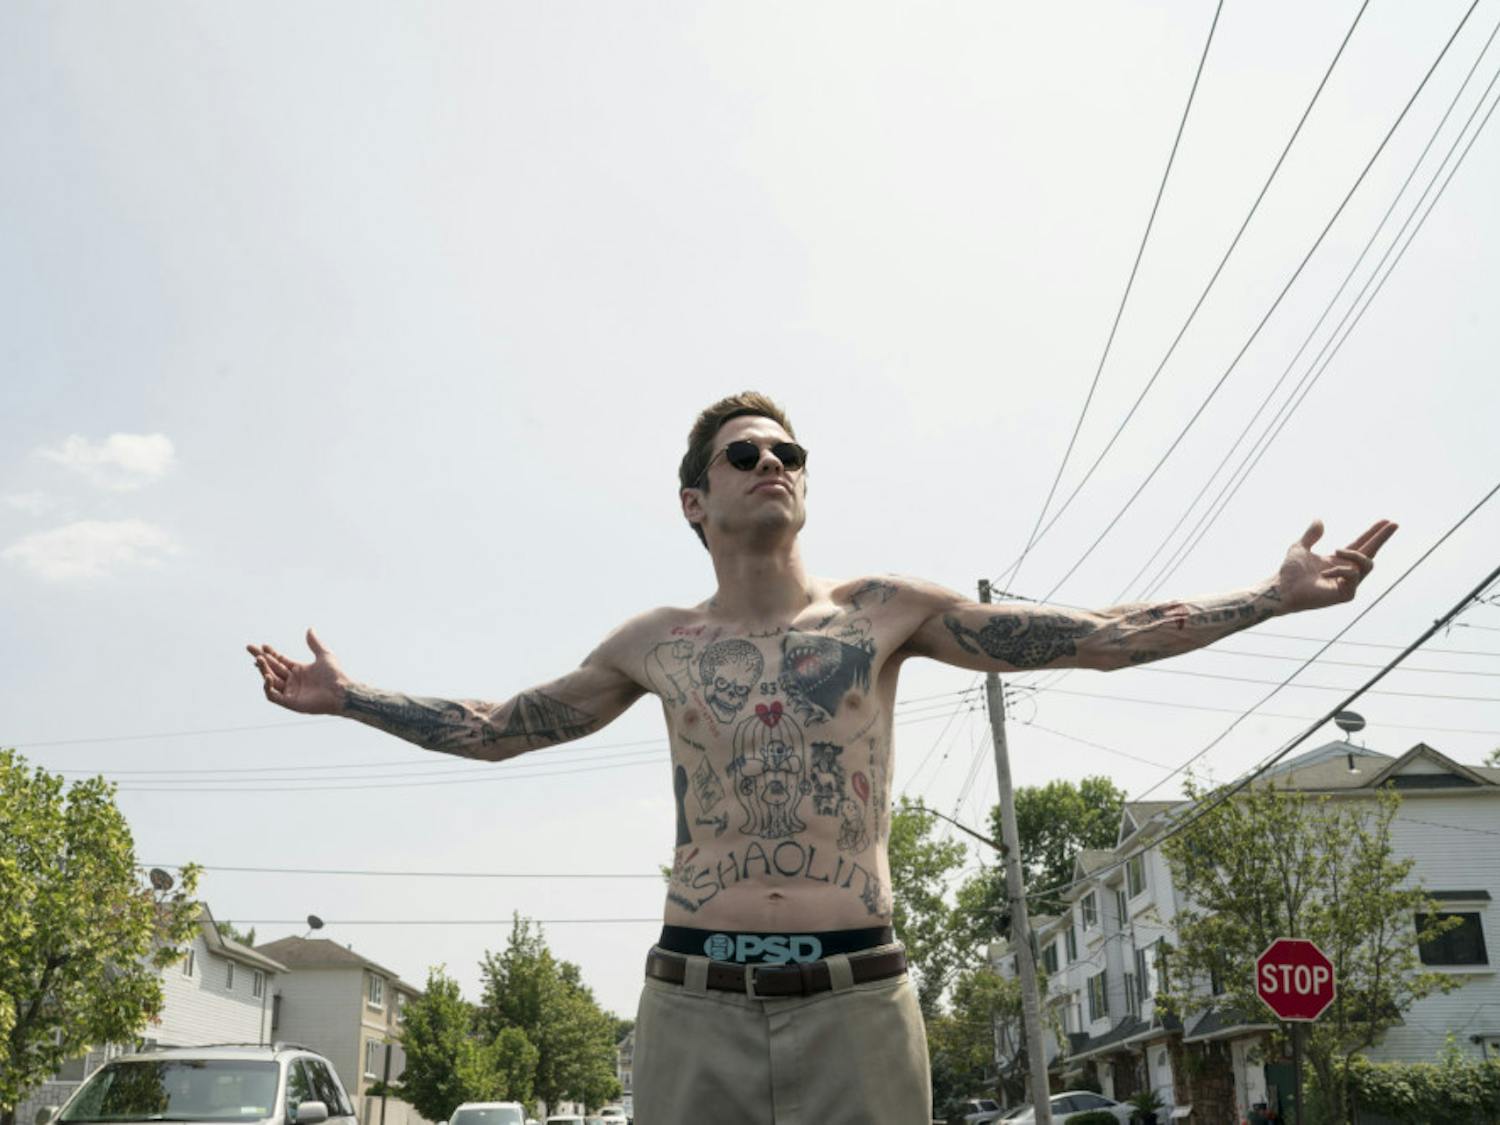 Pete Davidson as Scott Carlin in The King of Staten Island, directed by Judd Apatow.